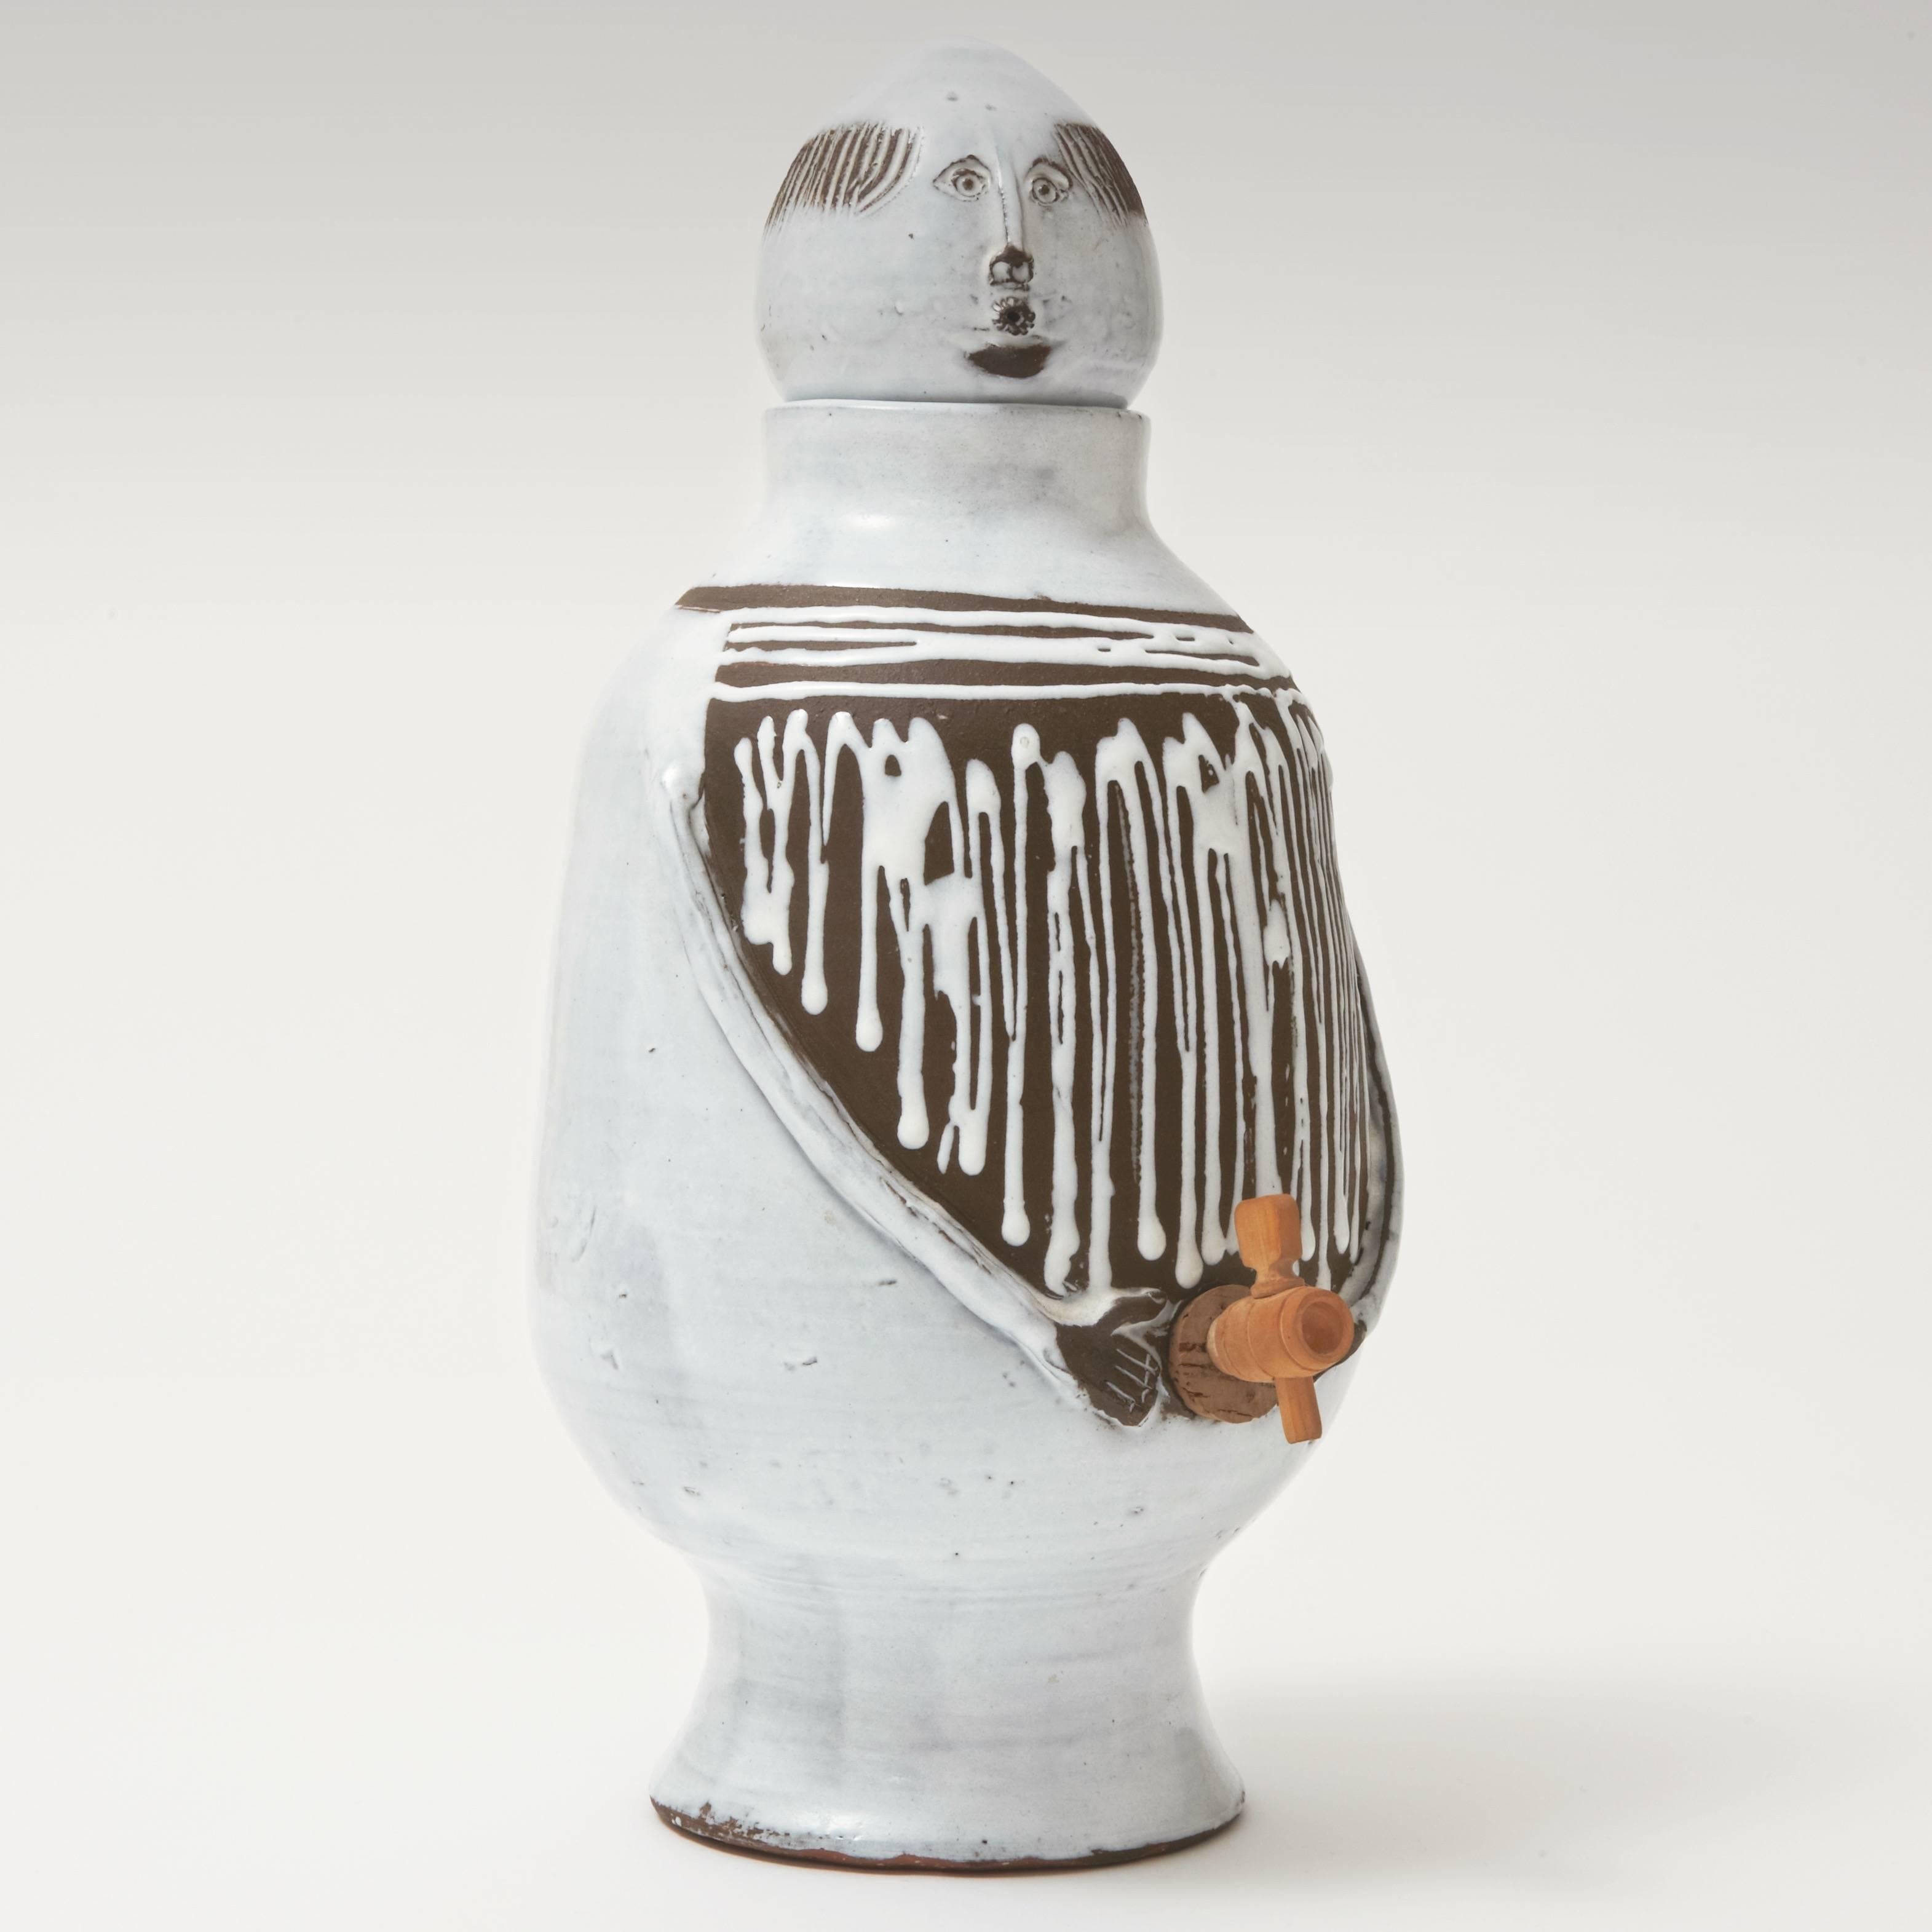 Biomorphic lidded pot, or beverage dispenser, with his removable head, and with its (funny) wooden and cork tap to dispenser.
Handmade decorative ceramic piece, created in Vallauris, by Pyot and Albert Thiry (signed). 

Textured clay with